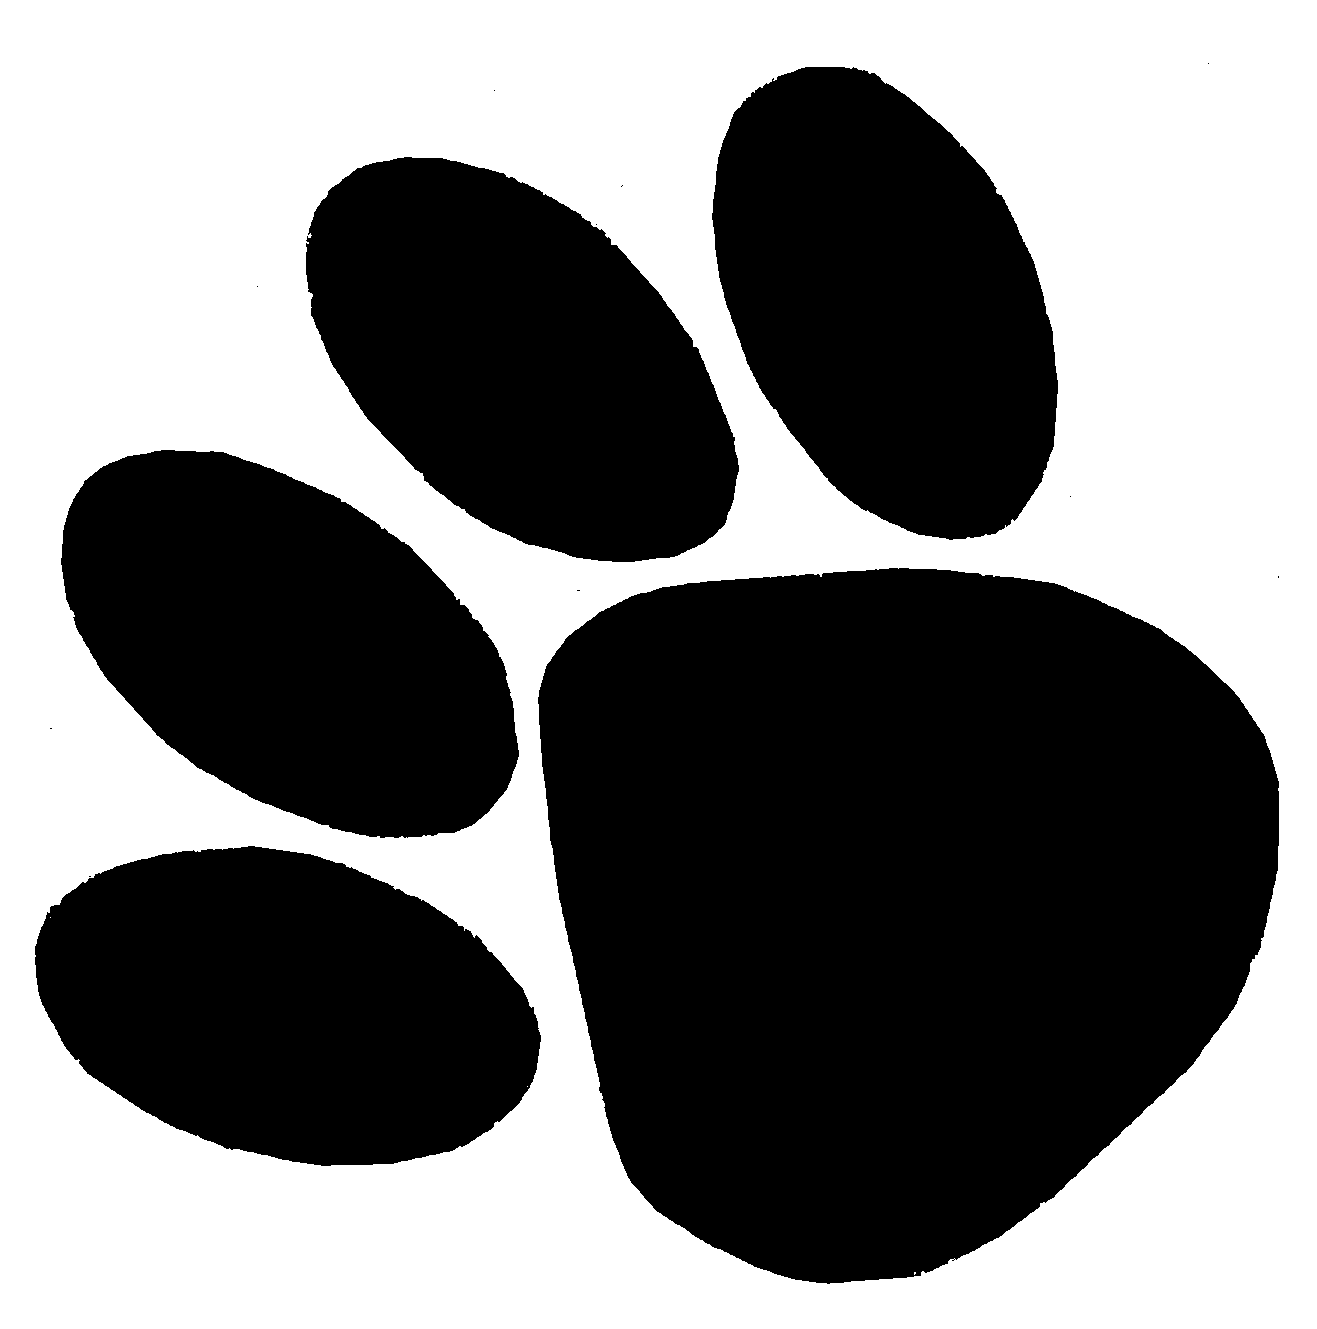 Free Paw Print Template, Download Free Paw Print Template png images